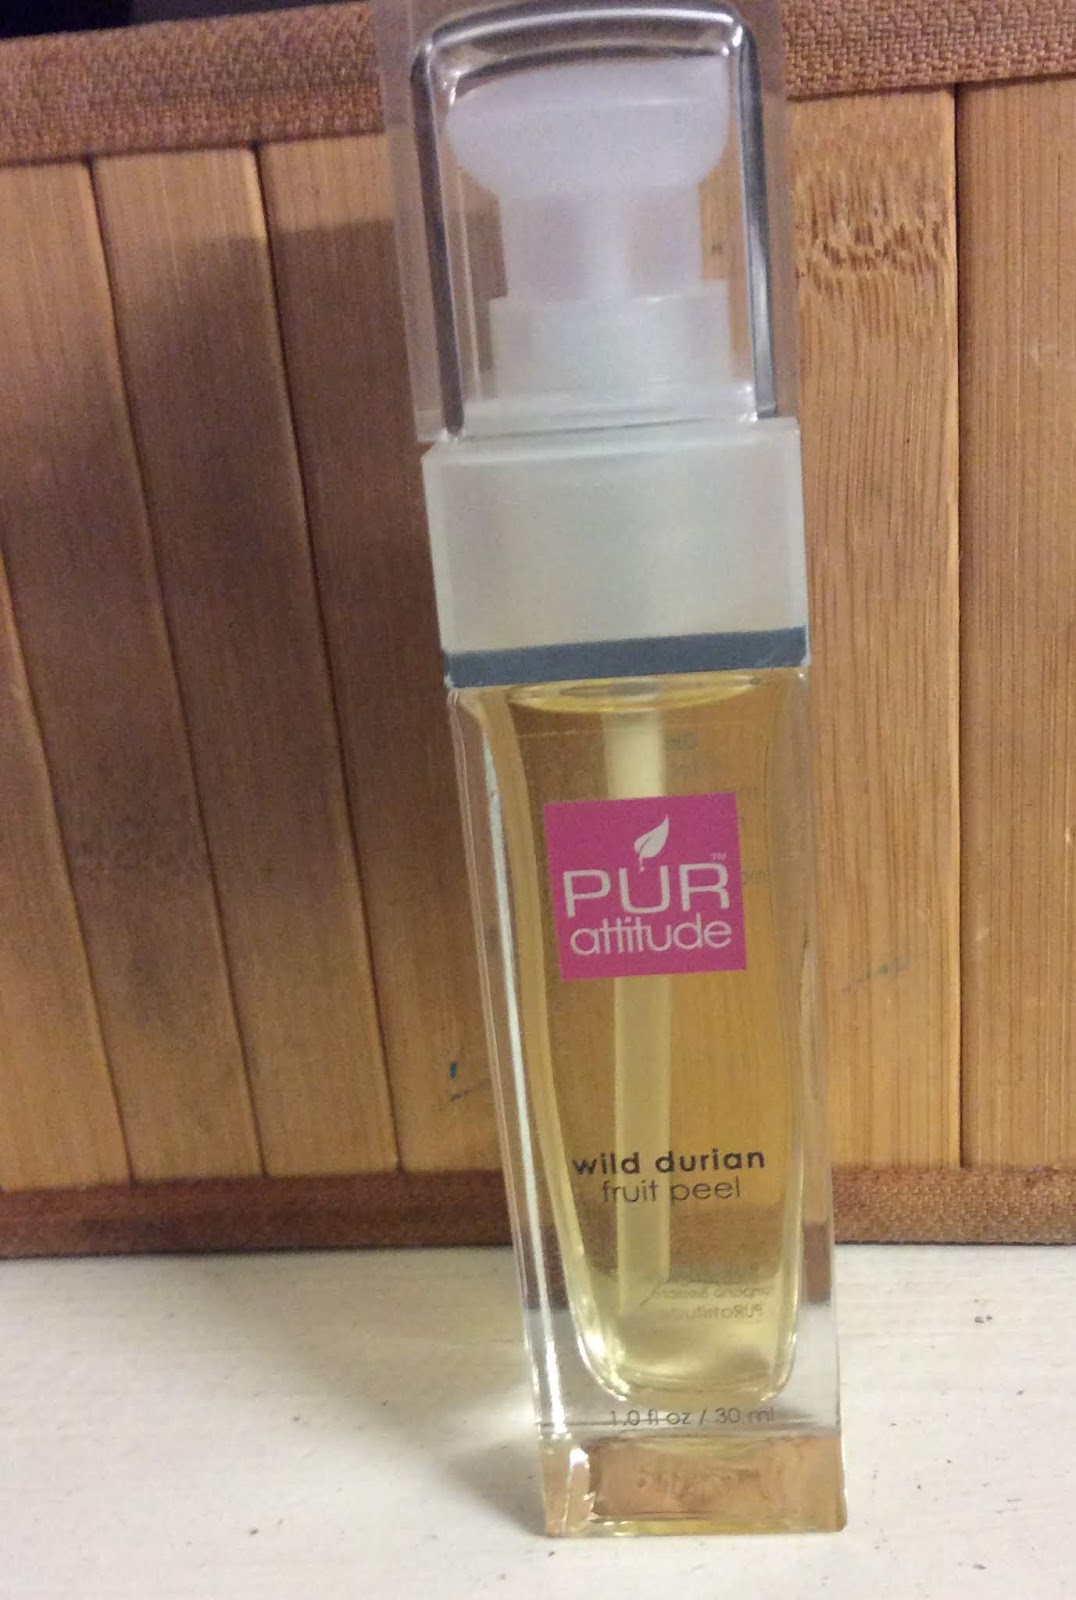 Heck Of A Bunch: PUR attitude Wild Durian Fruit Peel - Skincare Product ...